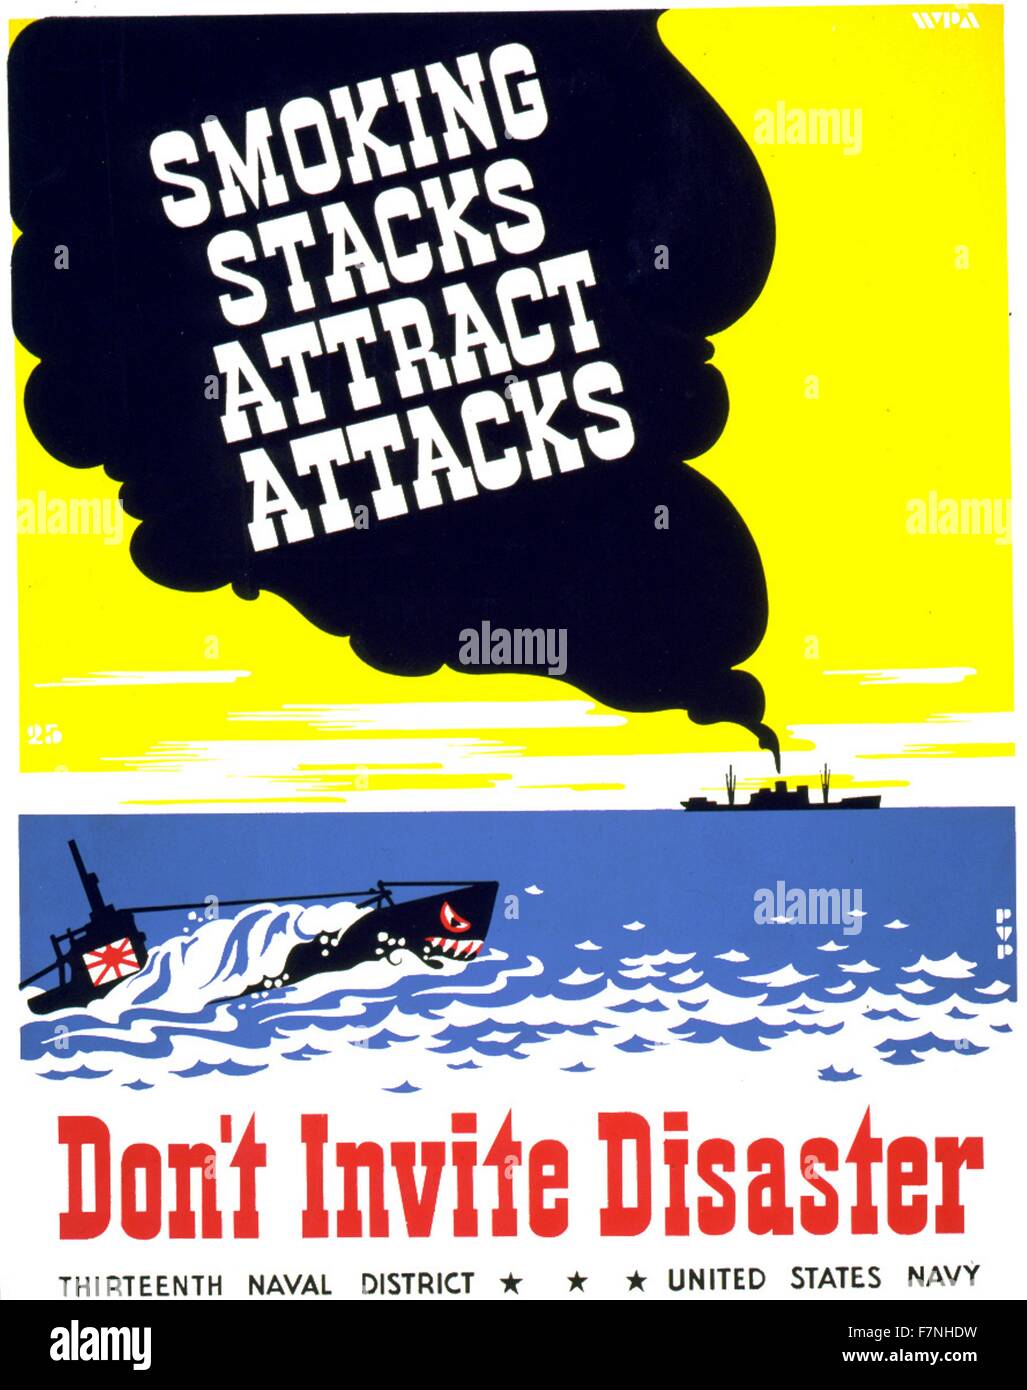 Smoking stacks attract attacks Don't invite disaster. World War Two, american propaganda poster for Thirteenth Naval District, United States Navy, showing smoke coming from smokestack of ship, Japanese submarine in foreground;  WPA Art Project, 1942 Stock Photo